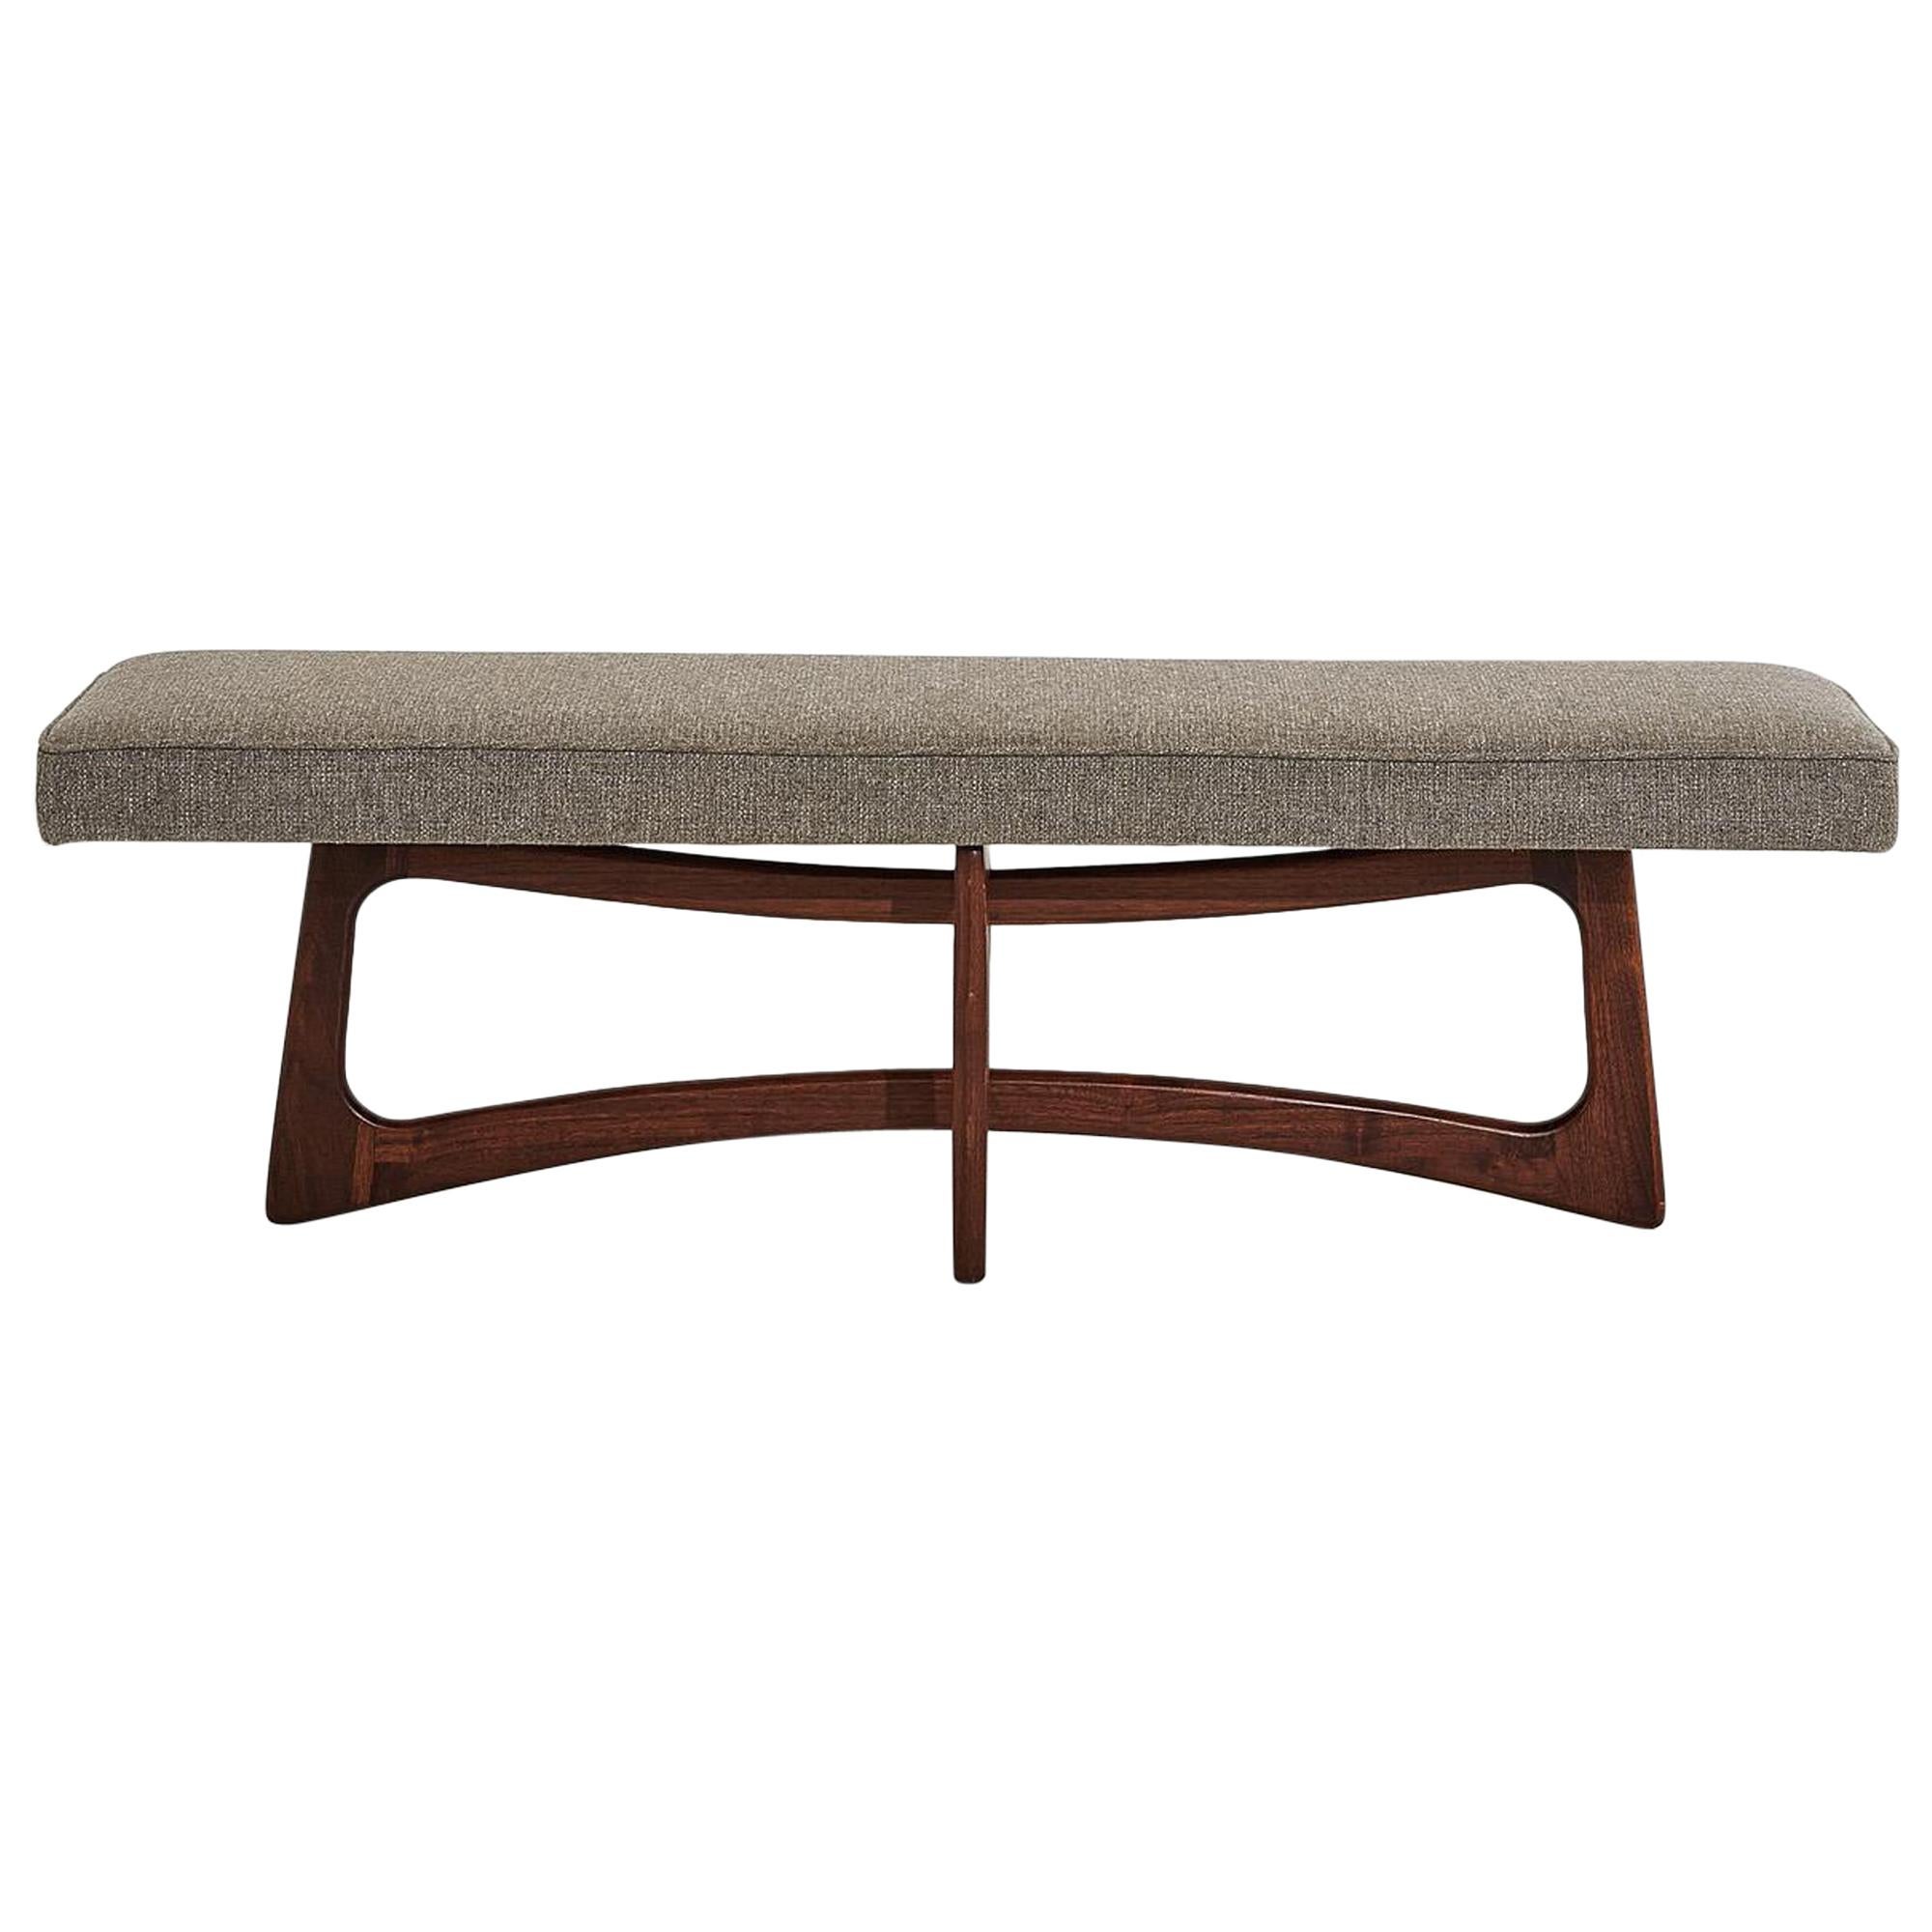 Adrian Pearsall Bench for Craft Associates, 1960